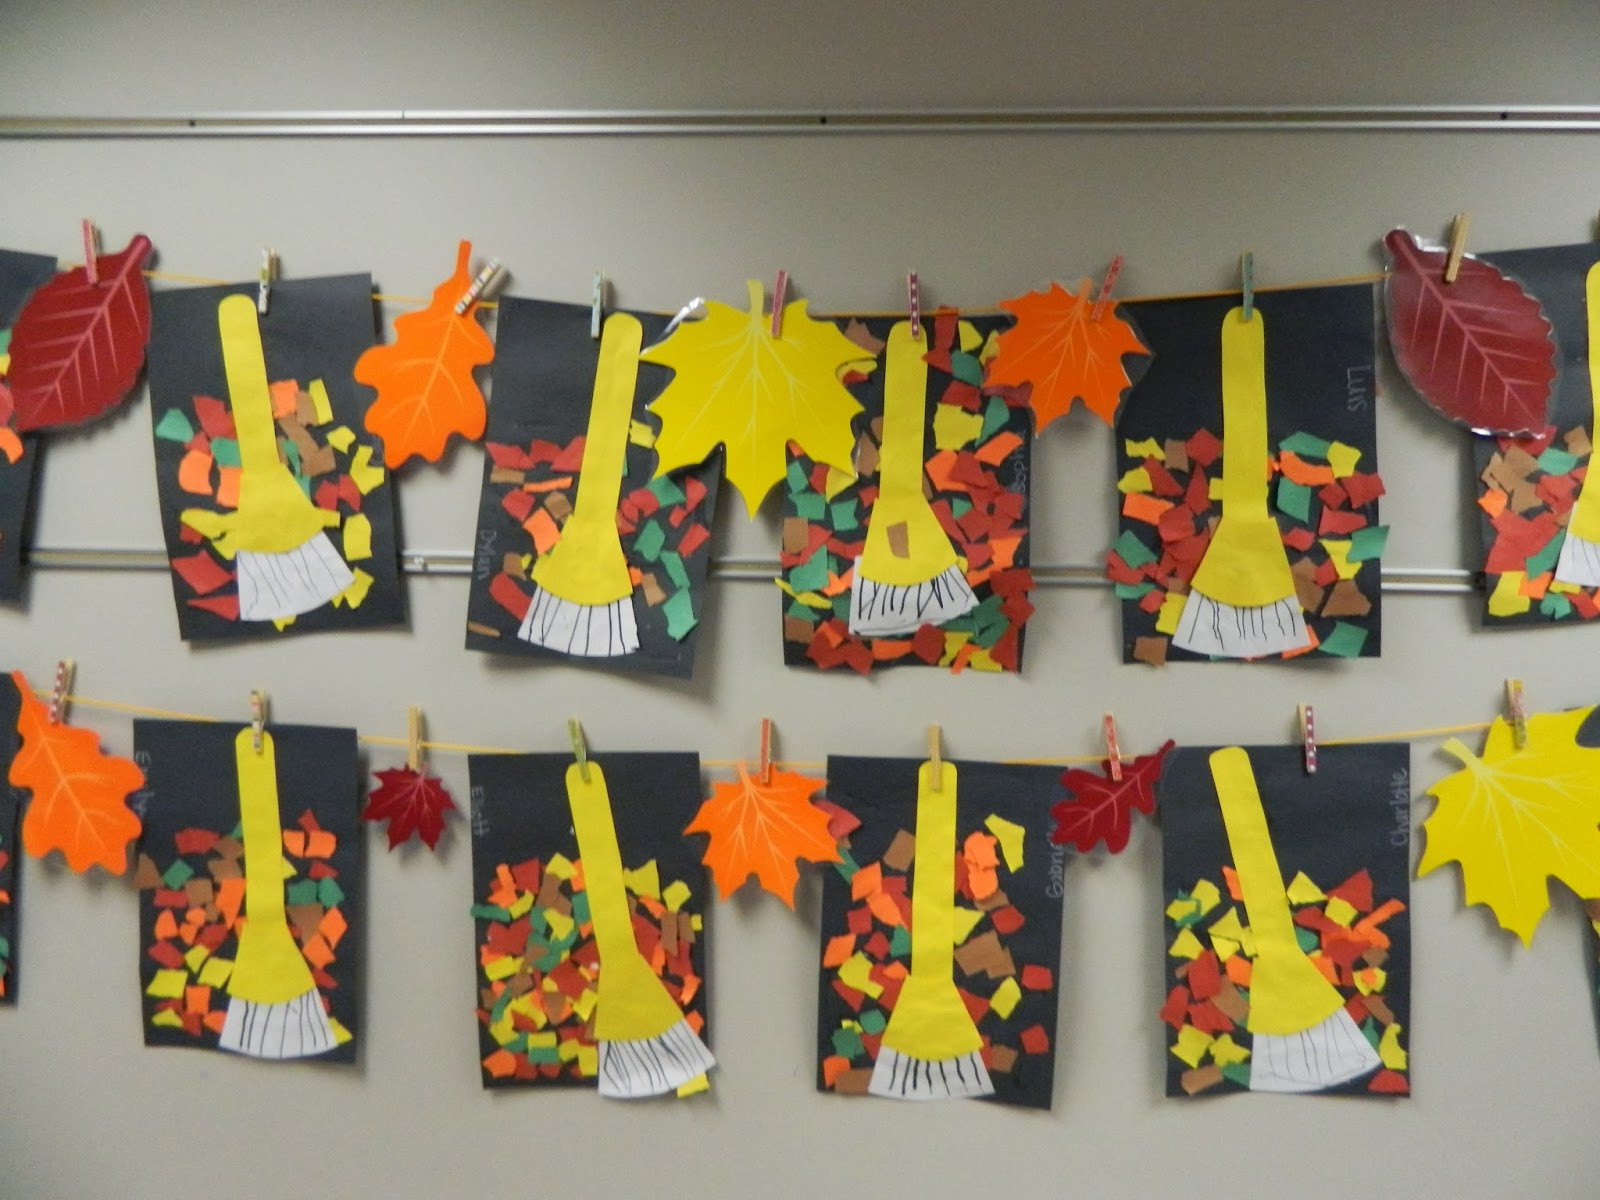 Fall Art Project For Kids
 the vintage umbrella rakes and leaves art project